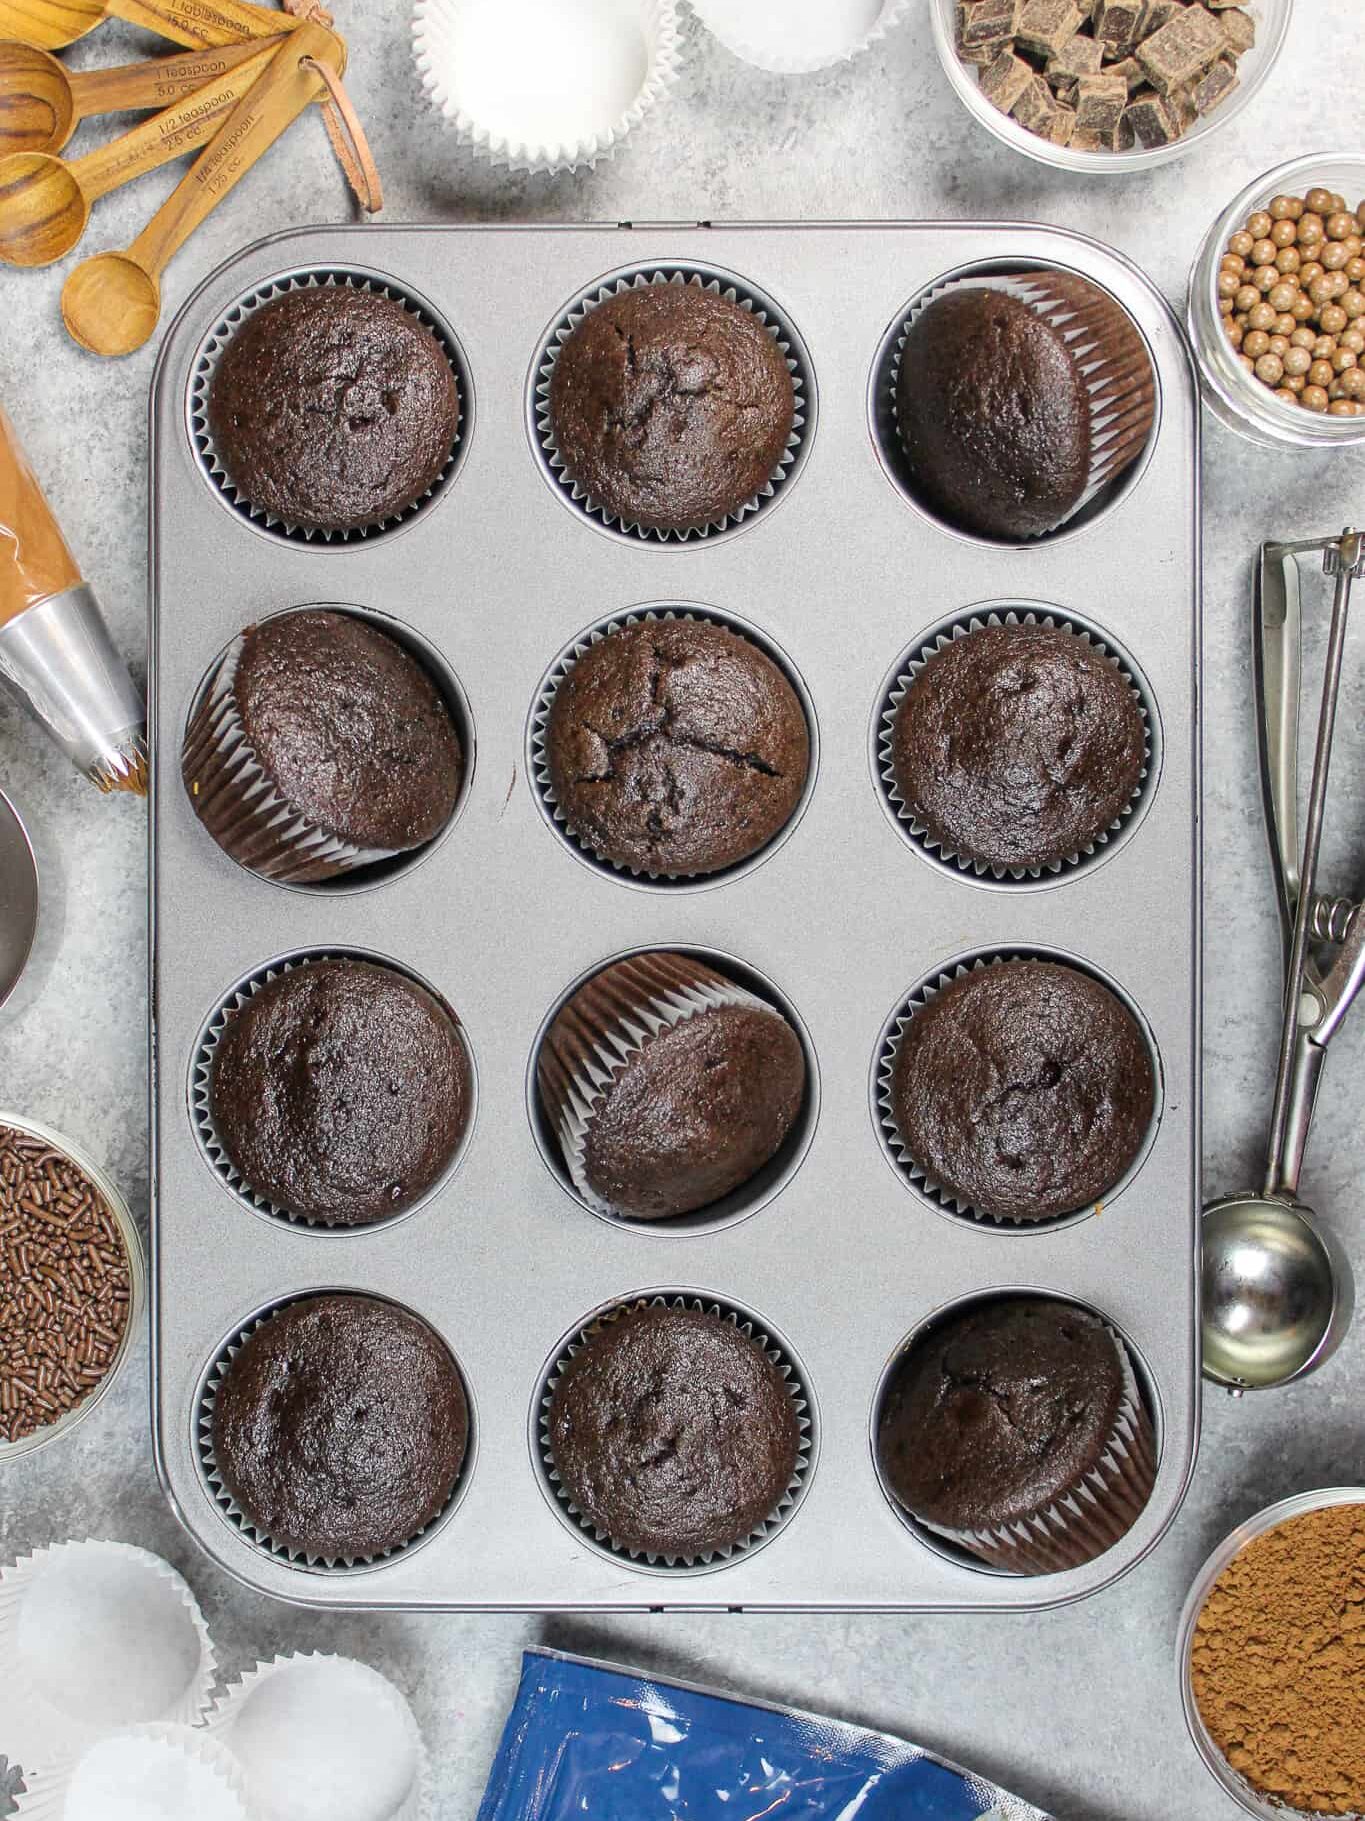 image of chocolate cupcakes baked in a pan